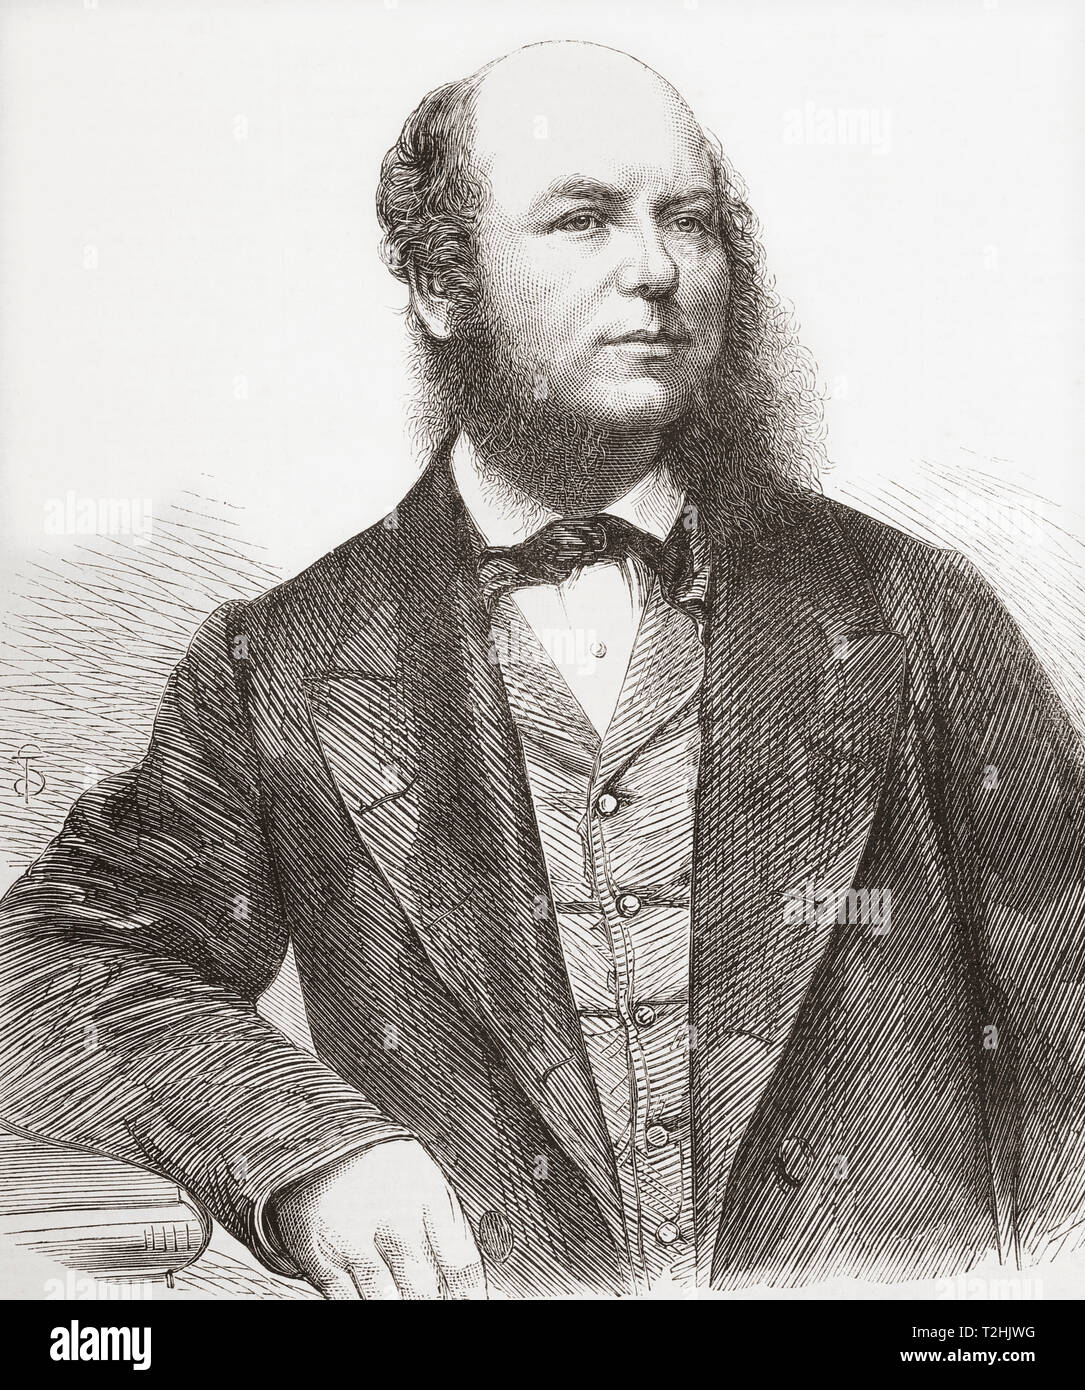 George Wingrove Cooke, 1814 – 1865.  British lawyer and historian.  From The Illustrated London News, published 1865. Stock Photo